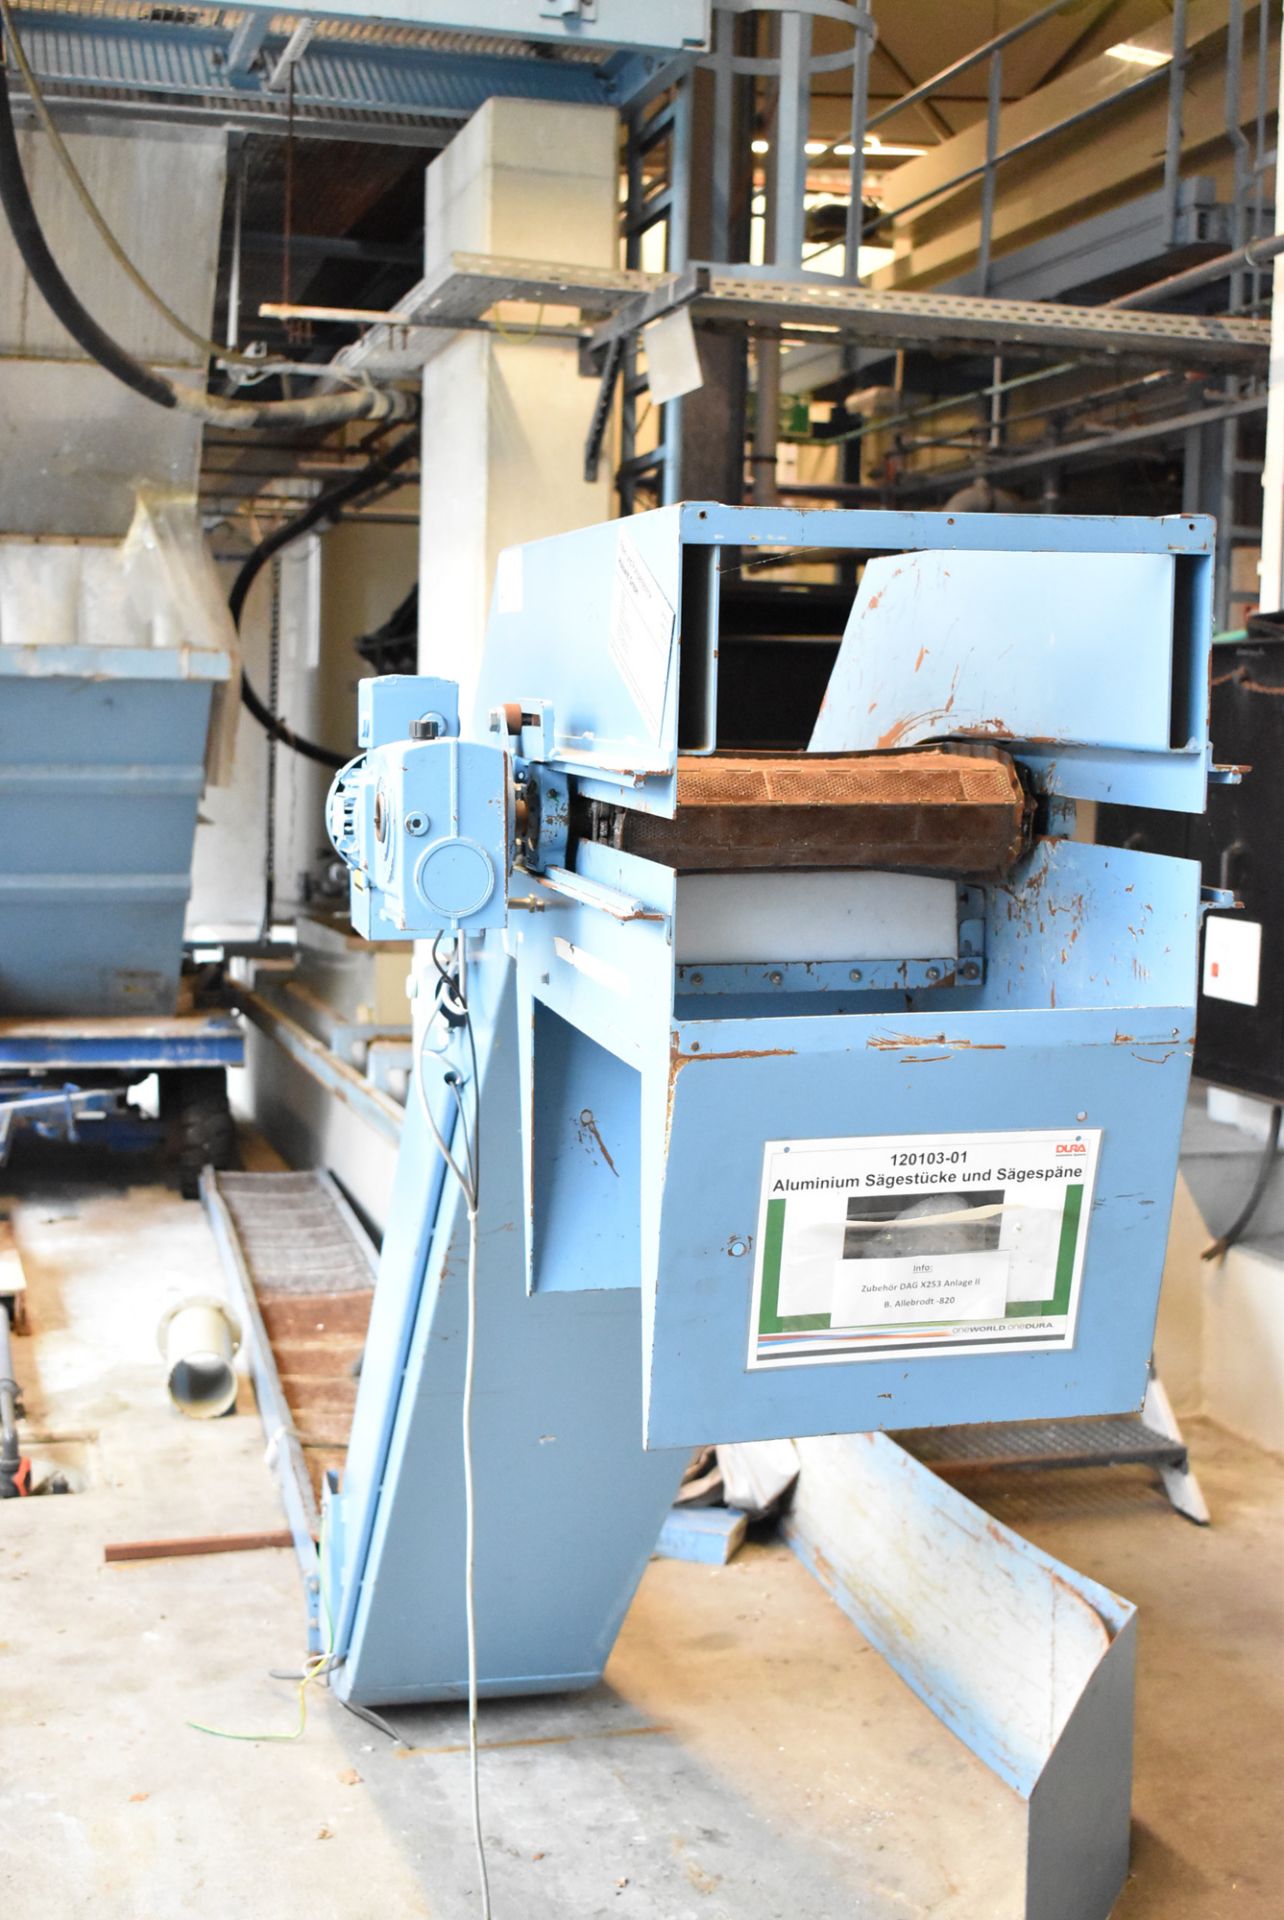 MSE FILTERPRESSEN (2012) KFP 1000-90-25K-P-L-S-SG HYDRAULIC FILTER PRESS WITH SIEMENS SIMATIC - Image 8 of 8